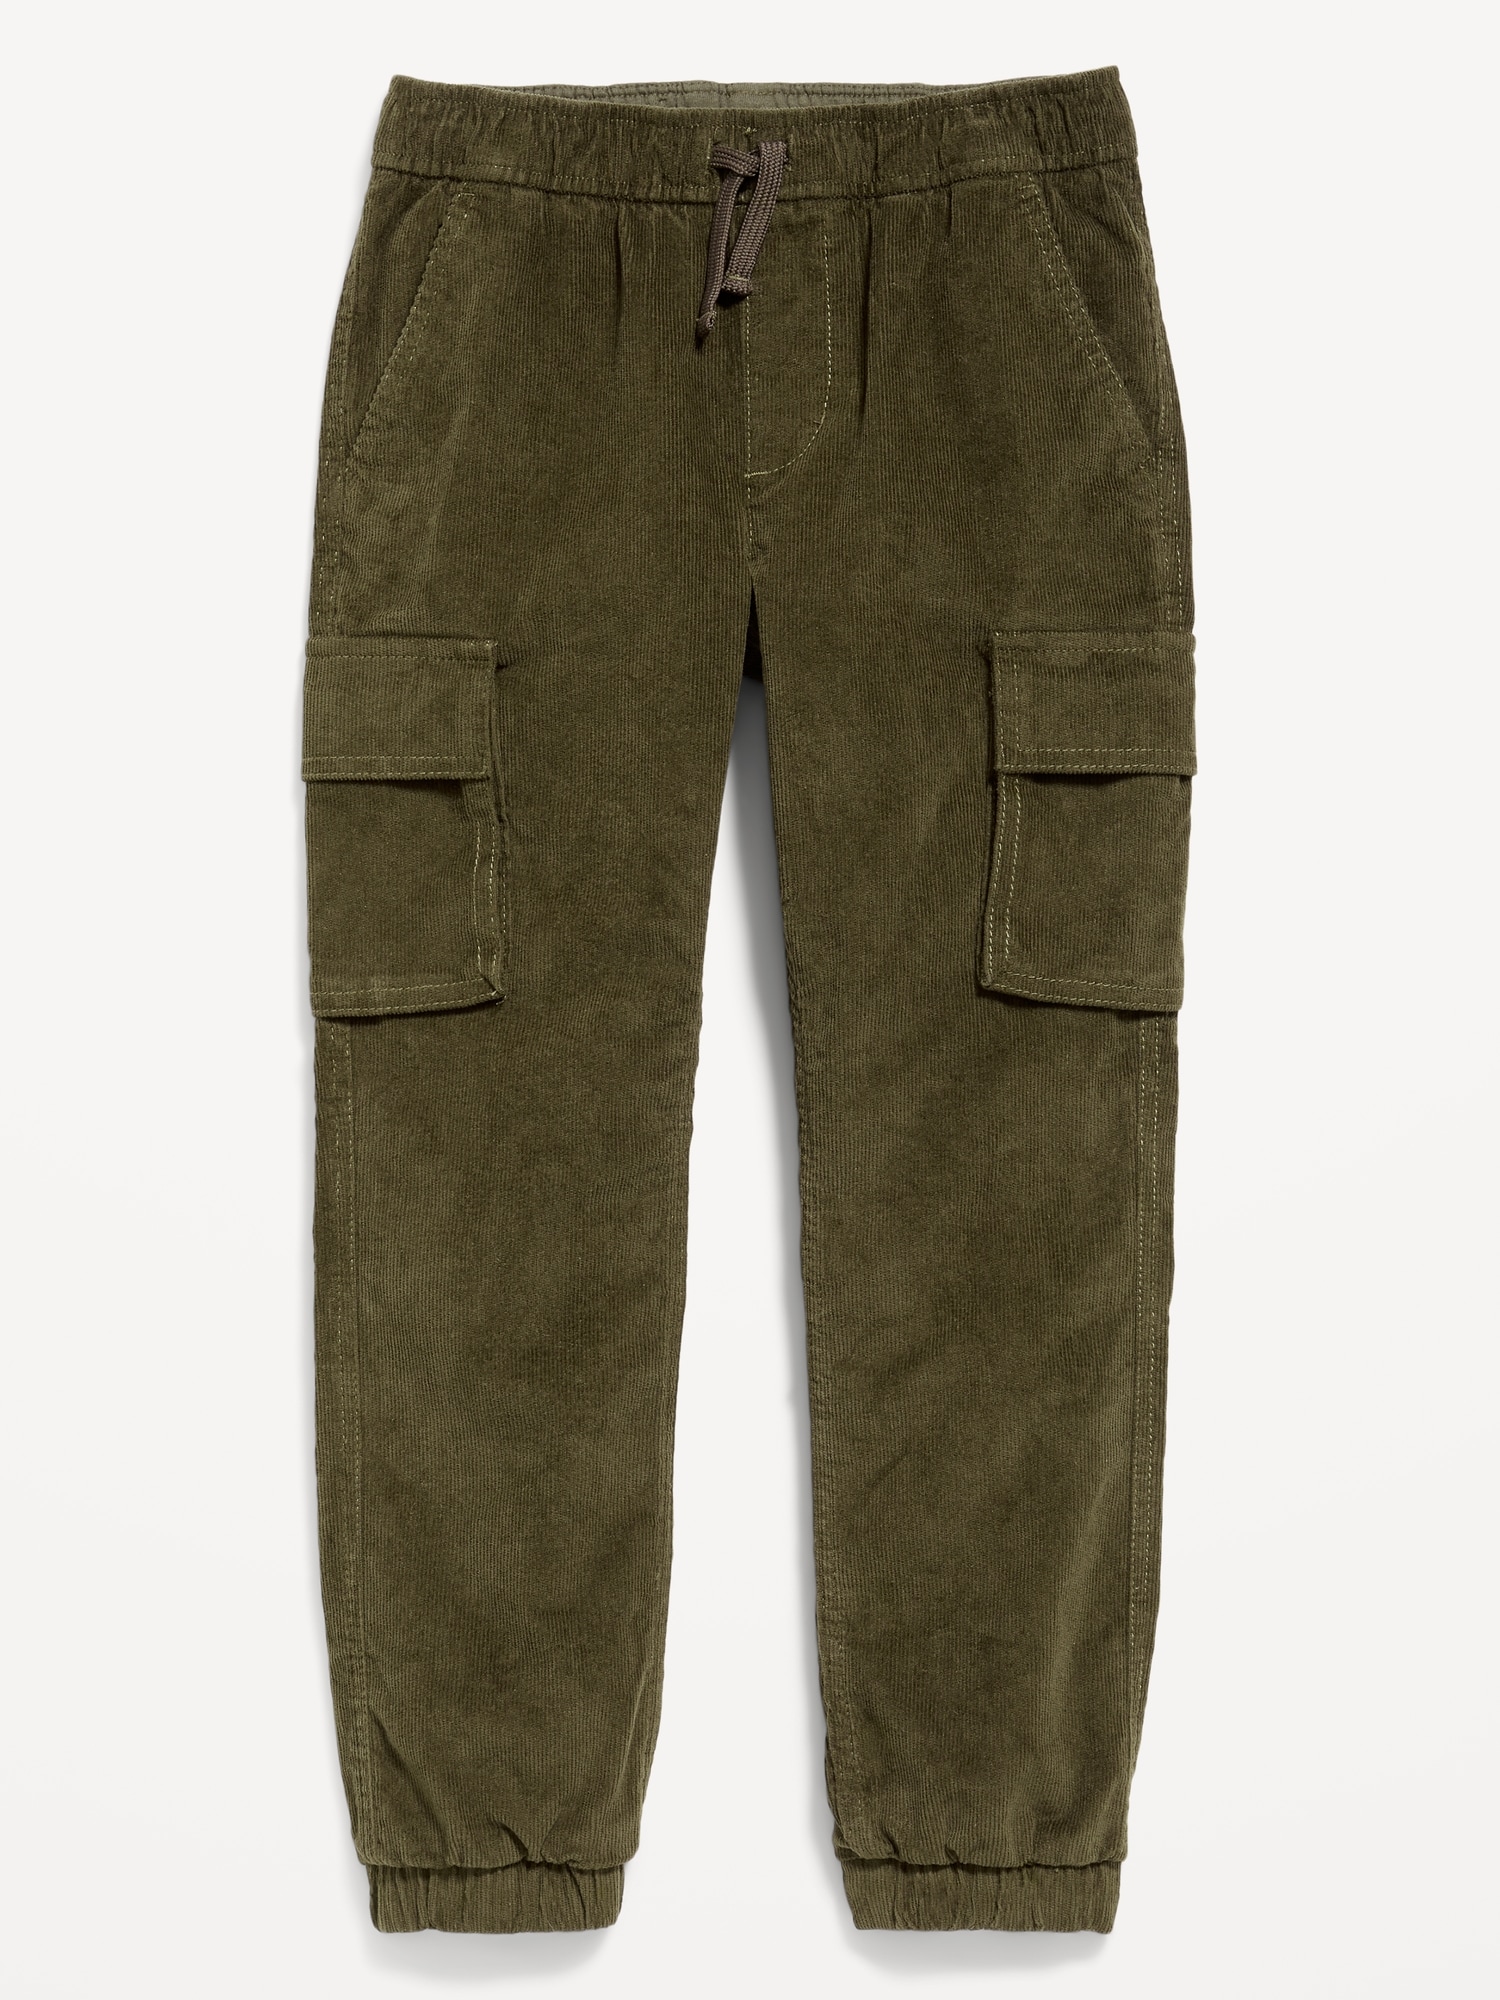 Agni cotton corduroy cargo pants in grey - Citizens Of Humanity | Mytheresa